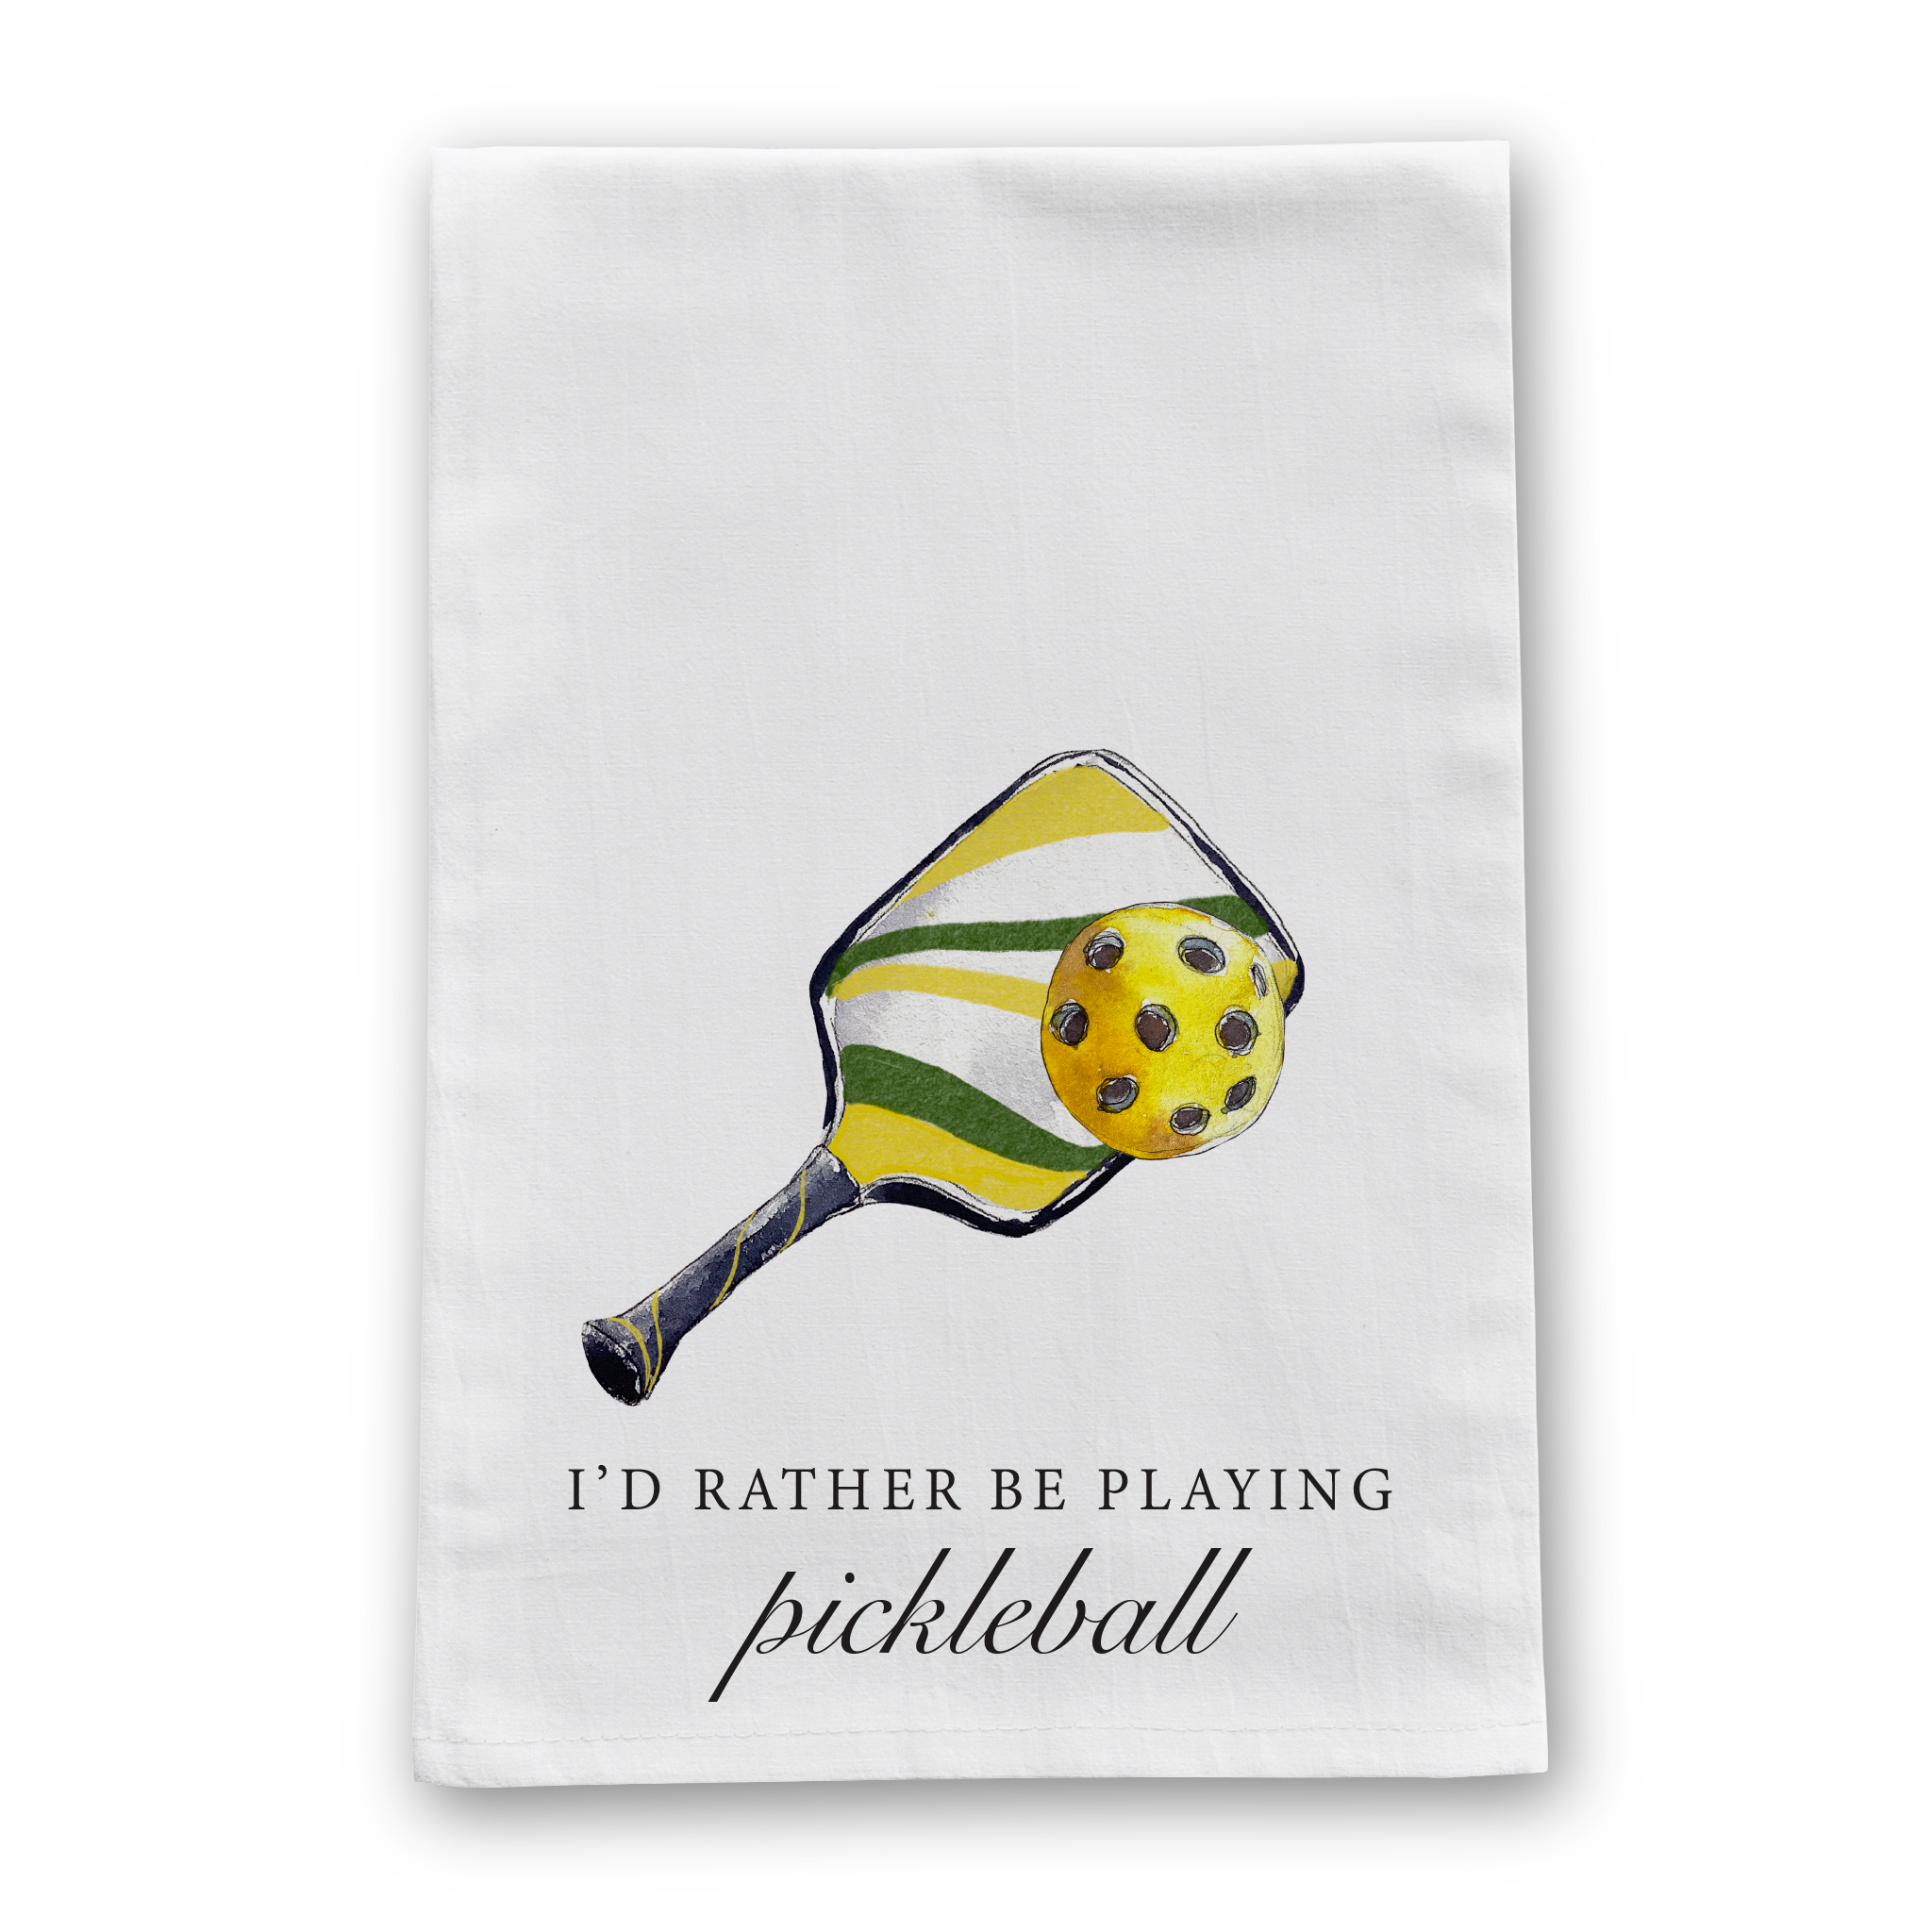 Barrel Down South - I'd Rather Be Playing Pickleball Tea Towel